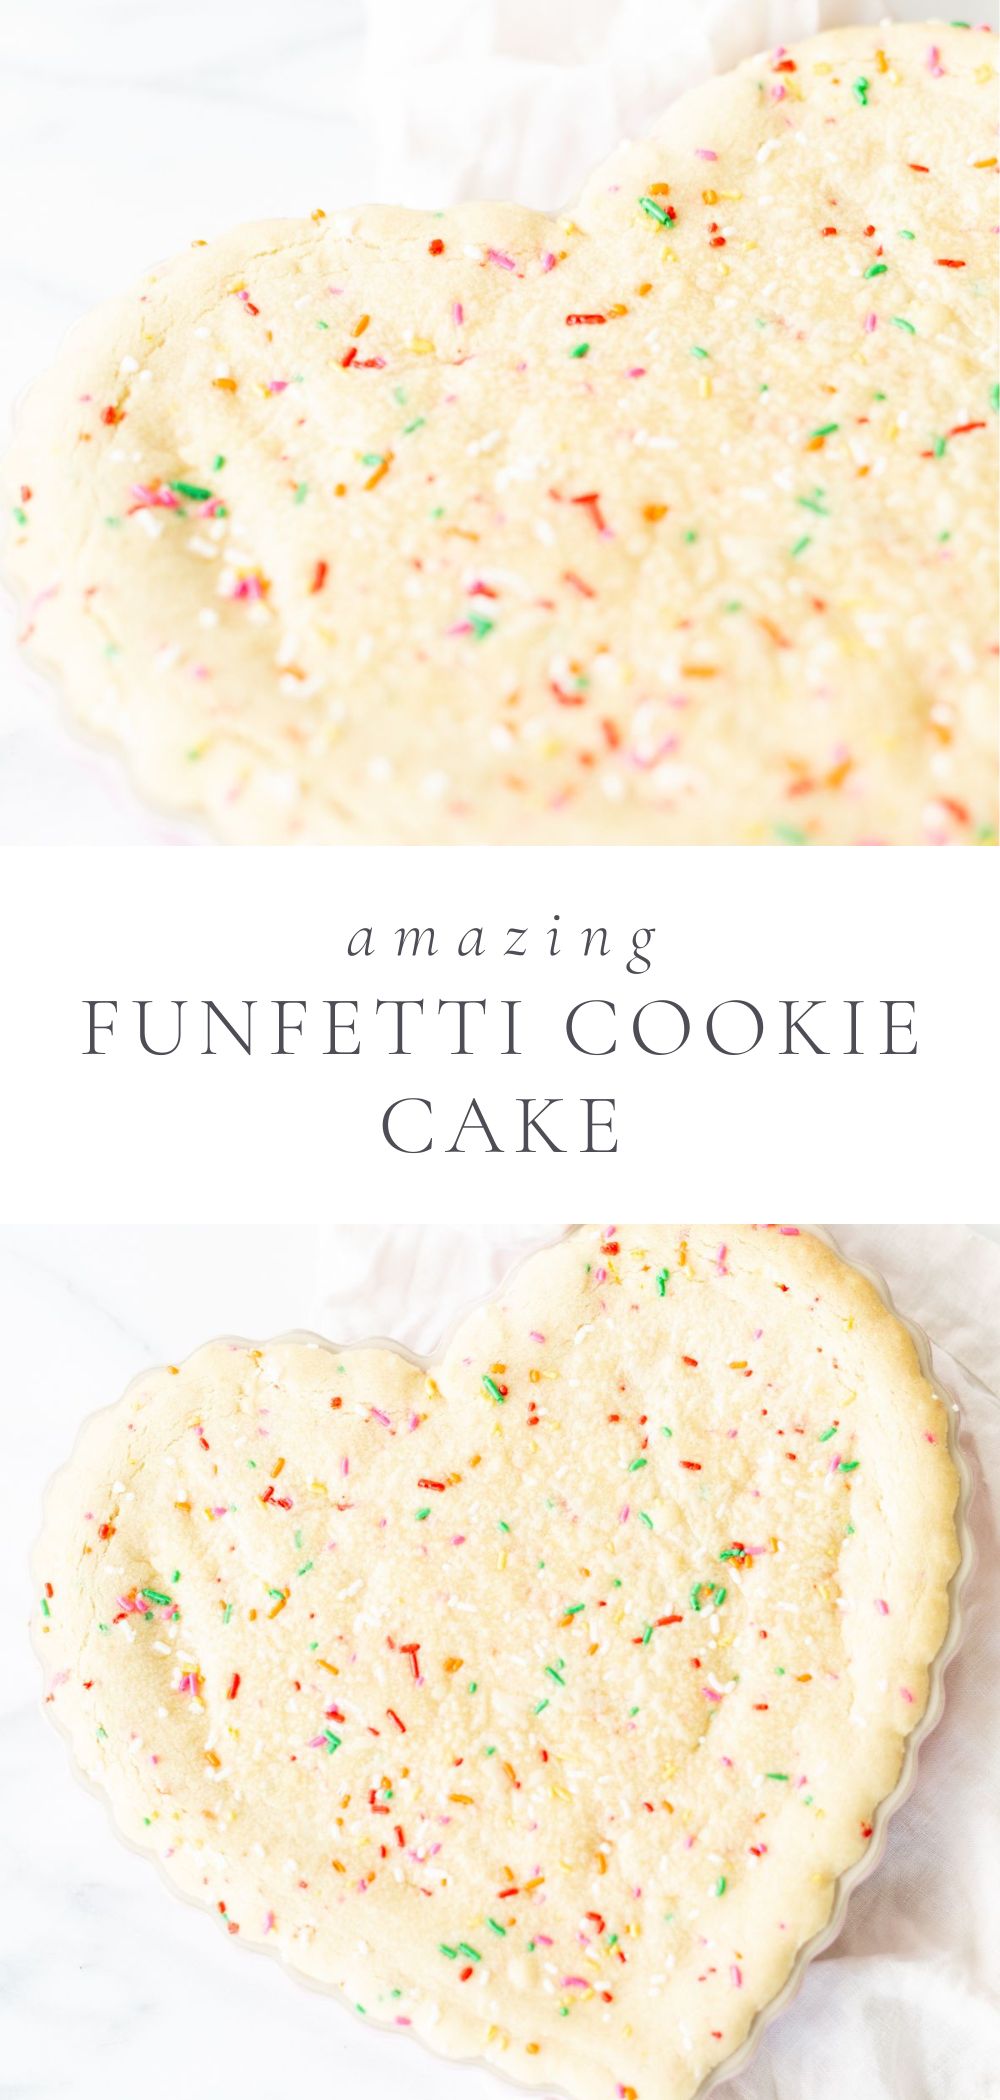 two pictures of Funfetti cookie cake in a heart shape with text between the pictures